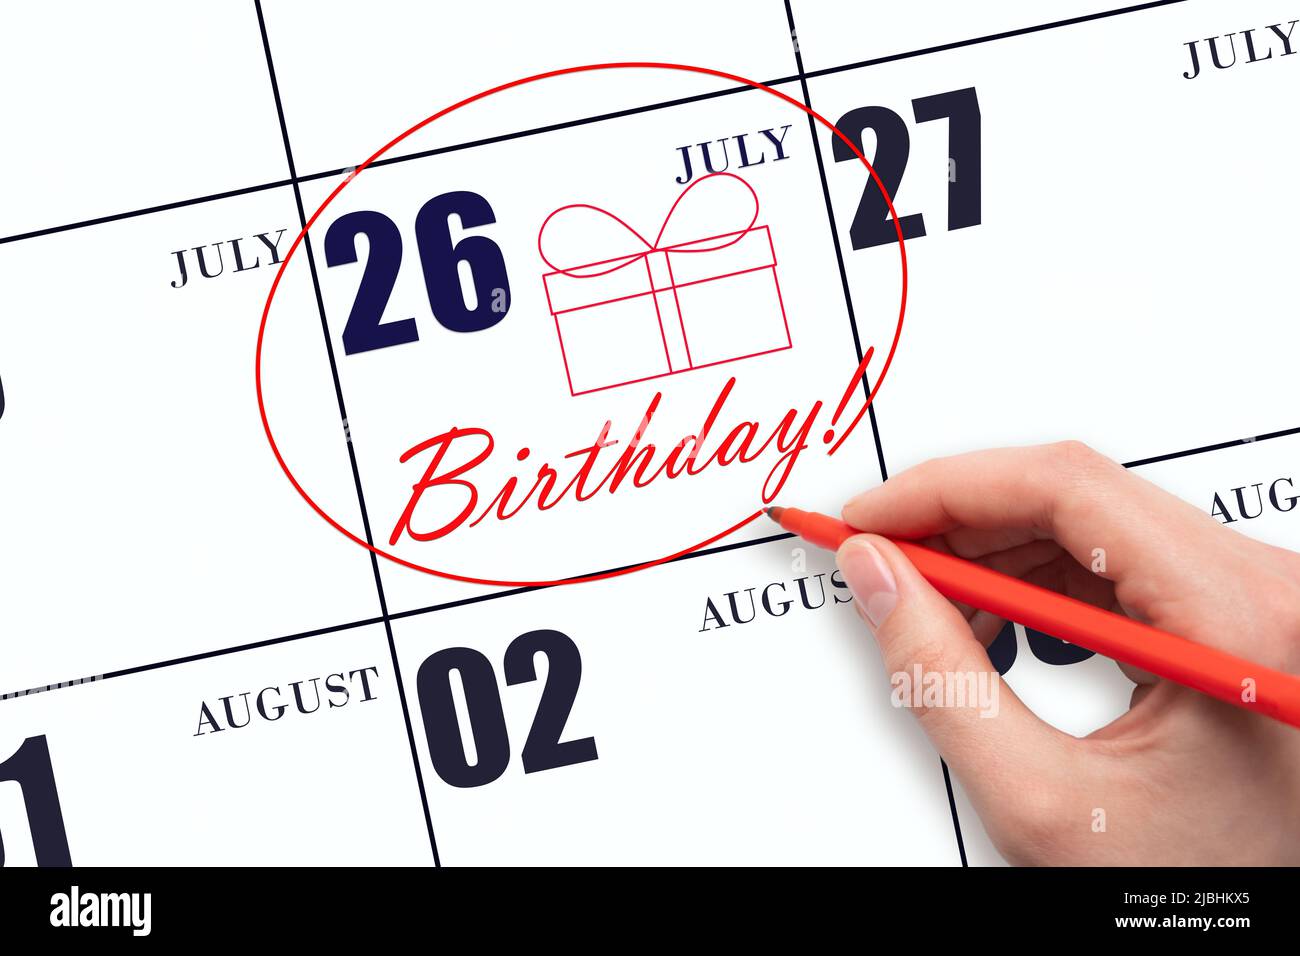 26th day ofJuly. The hand circles the date on the calendar 26July, draws a gift box and writes the text Birthday. Holiday. Summer month, day of the ye Stock Photo